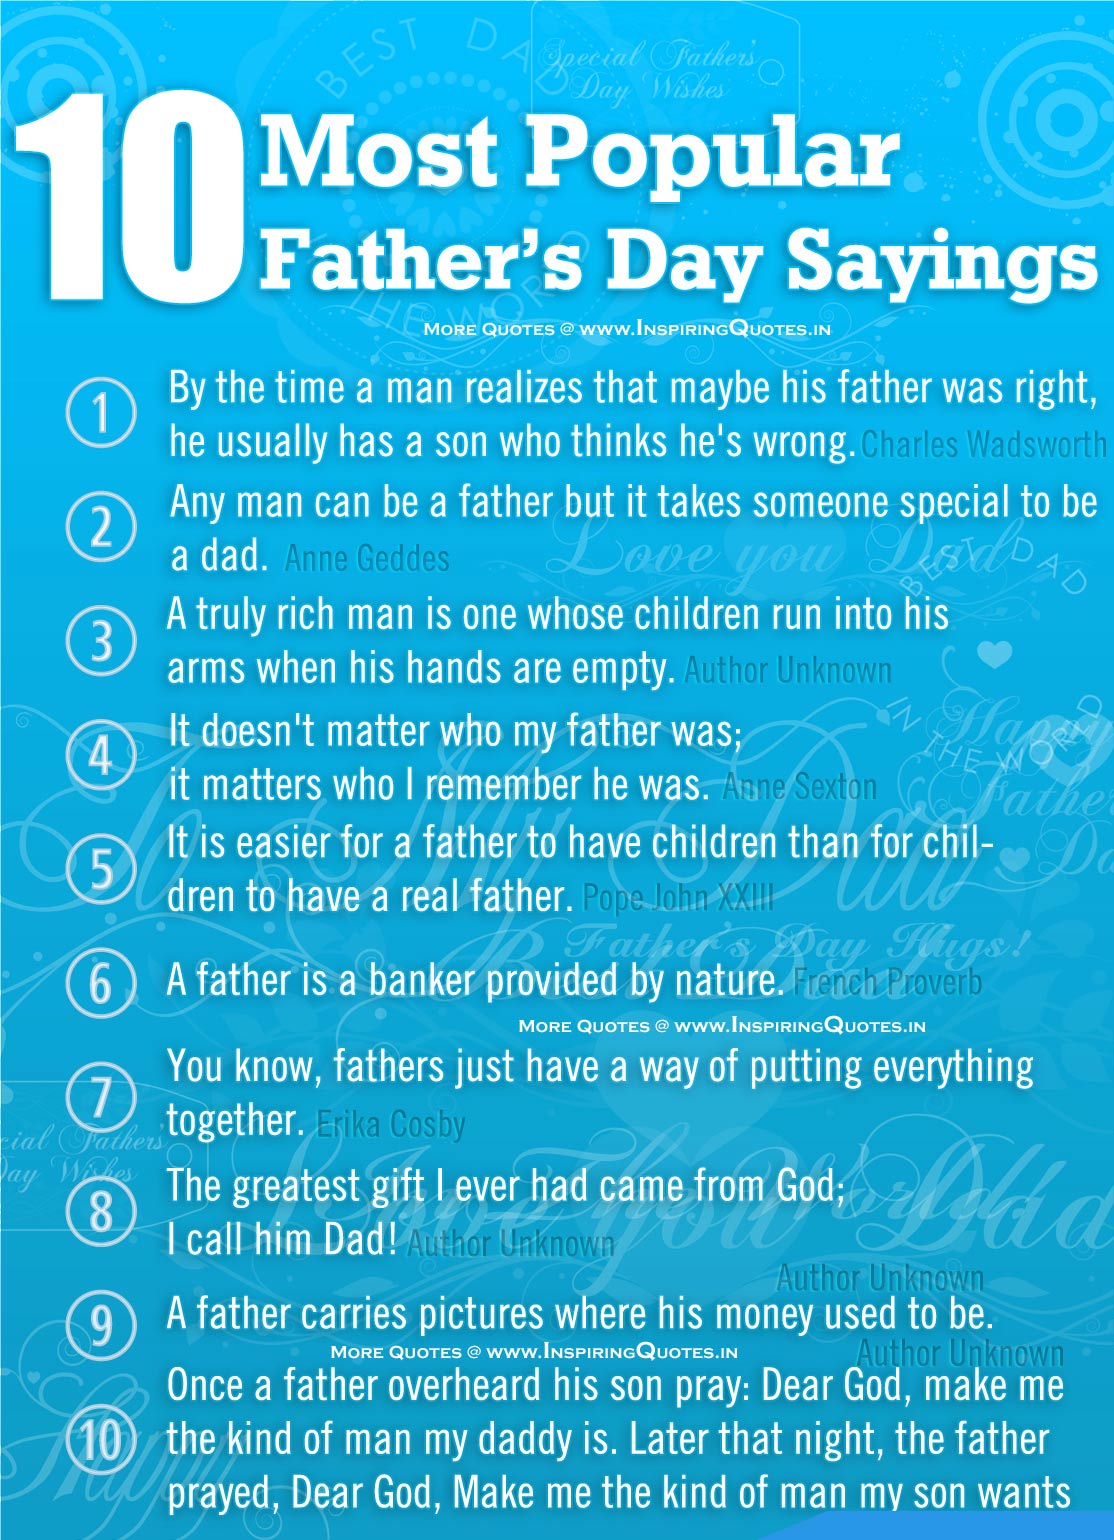 Happy Father Day Quotes 2014 - 10 Most Popular Father's Day Sayings